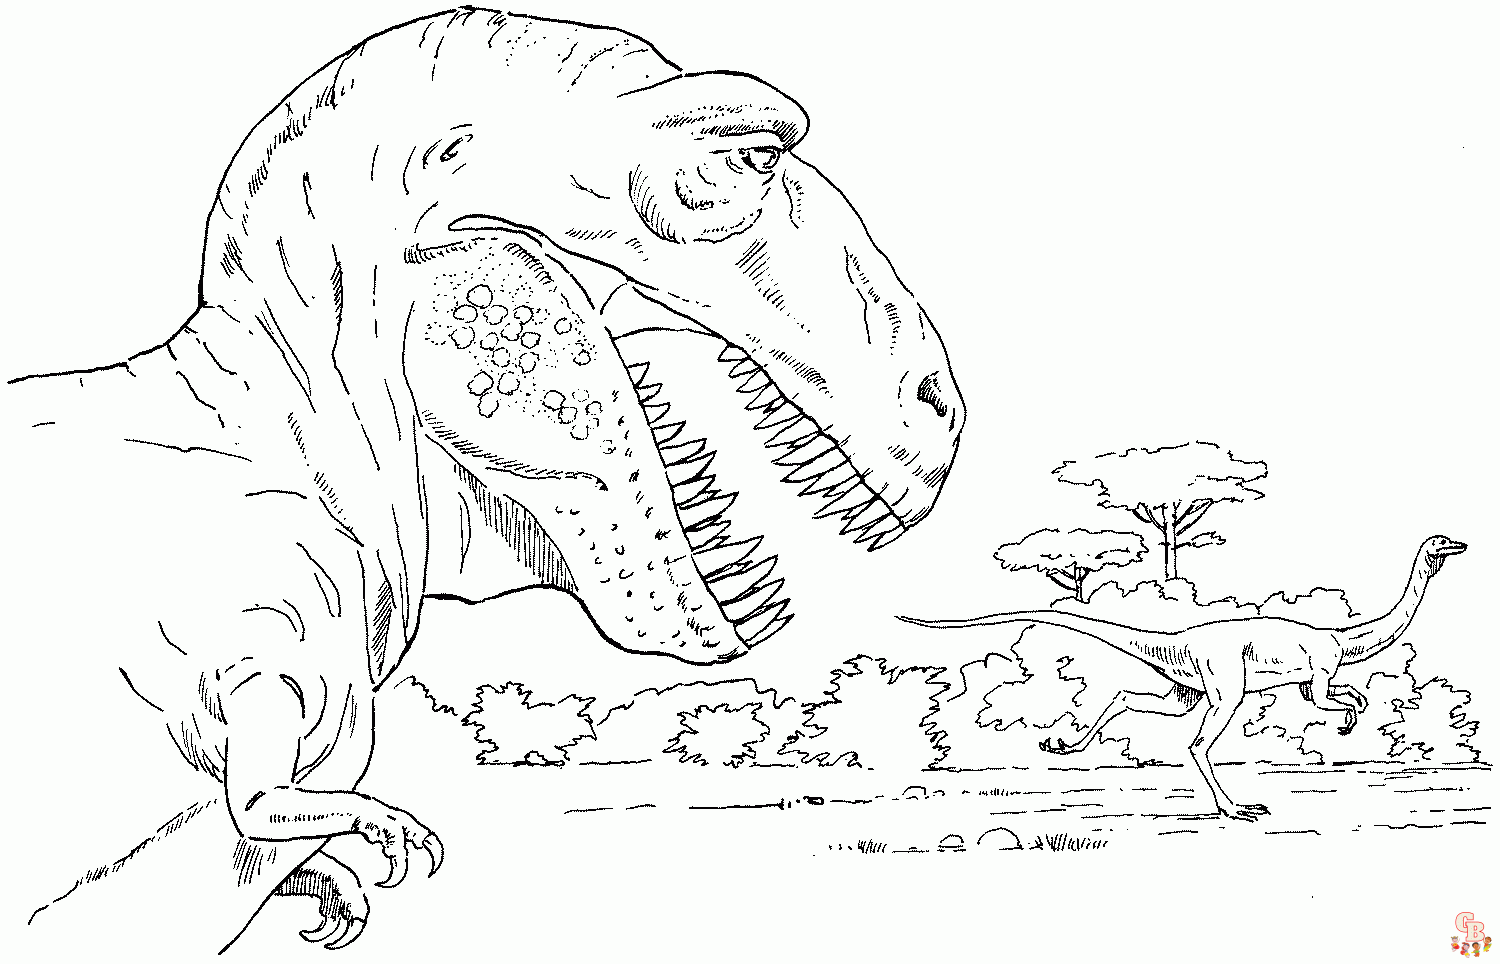 Jurassic Park coloring pages 1